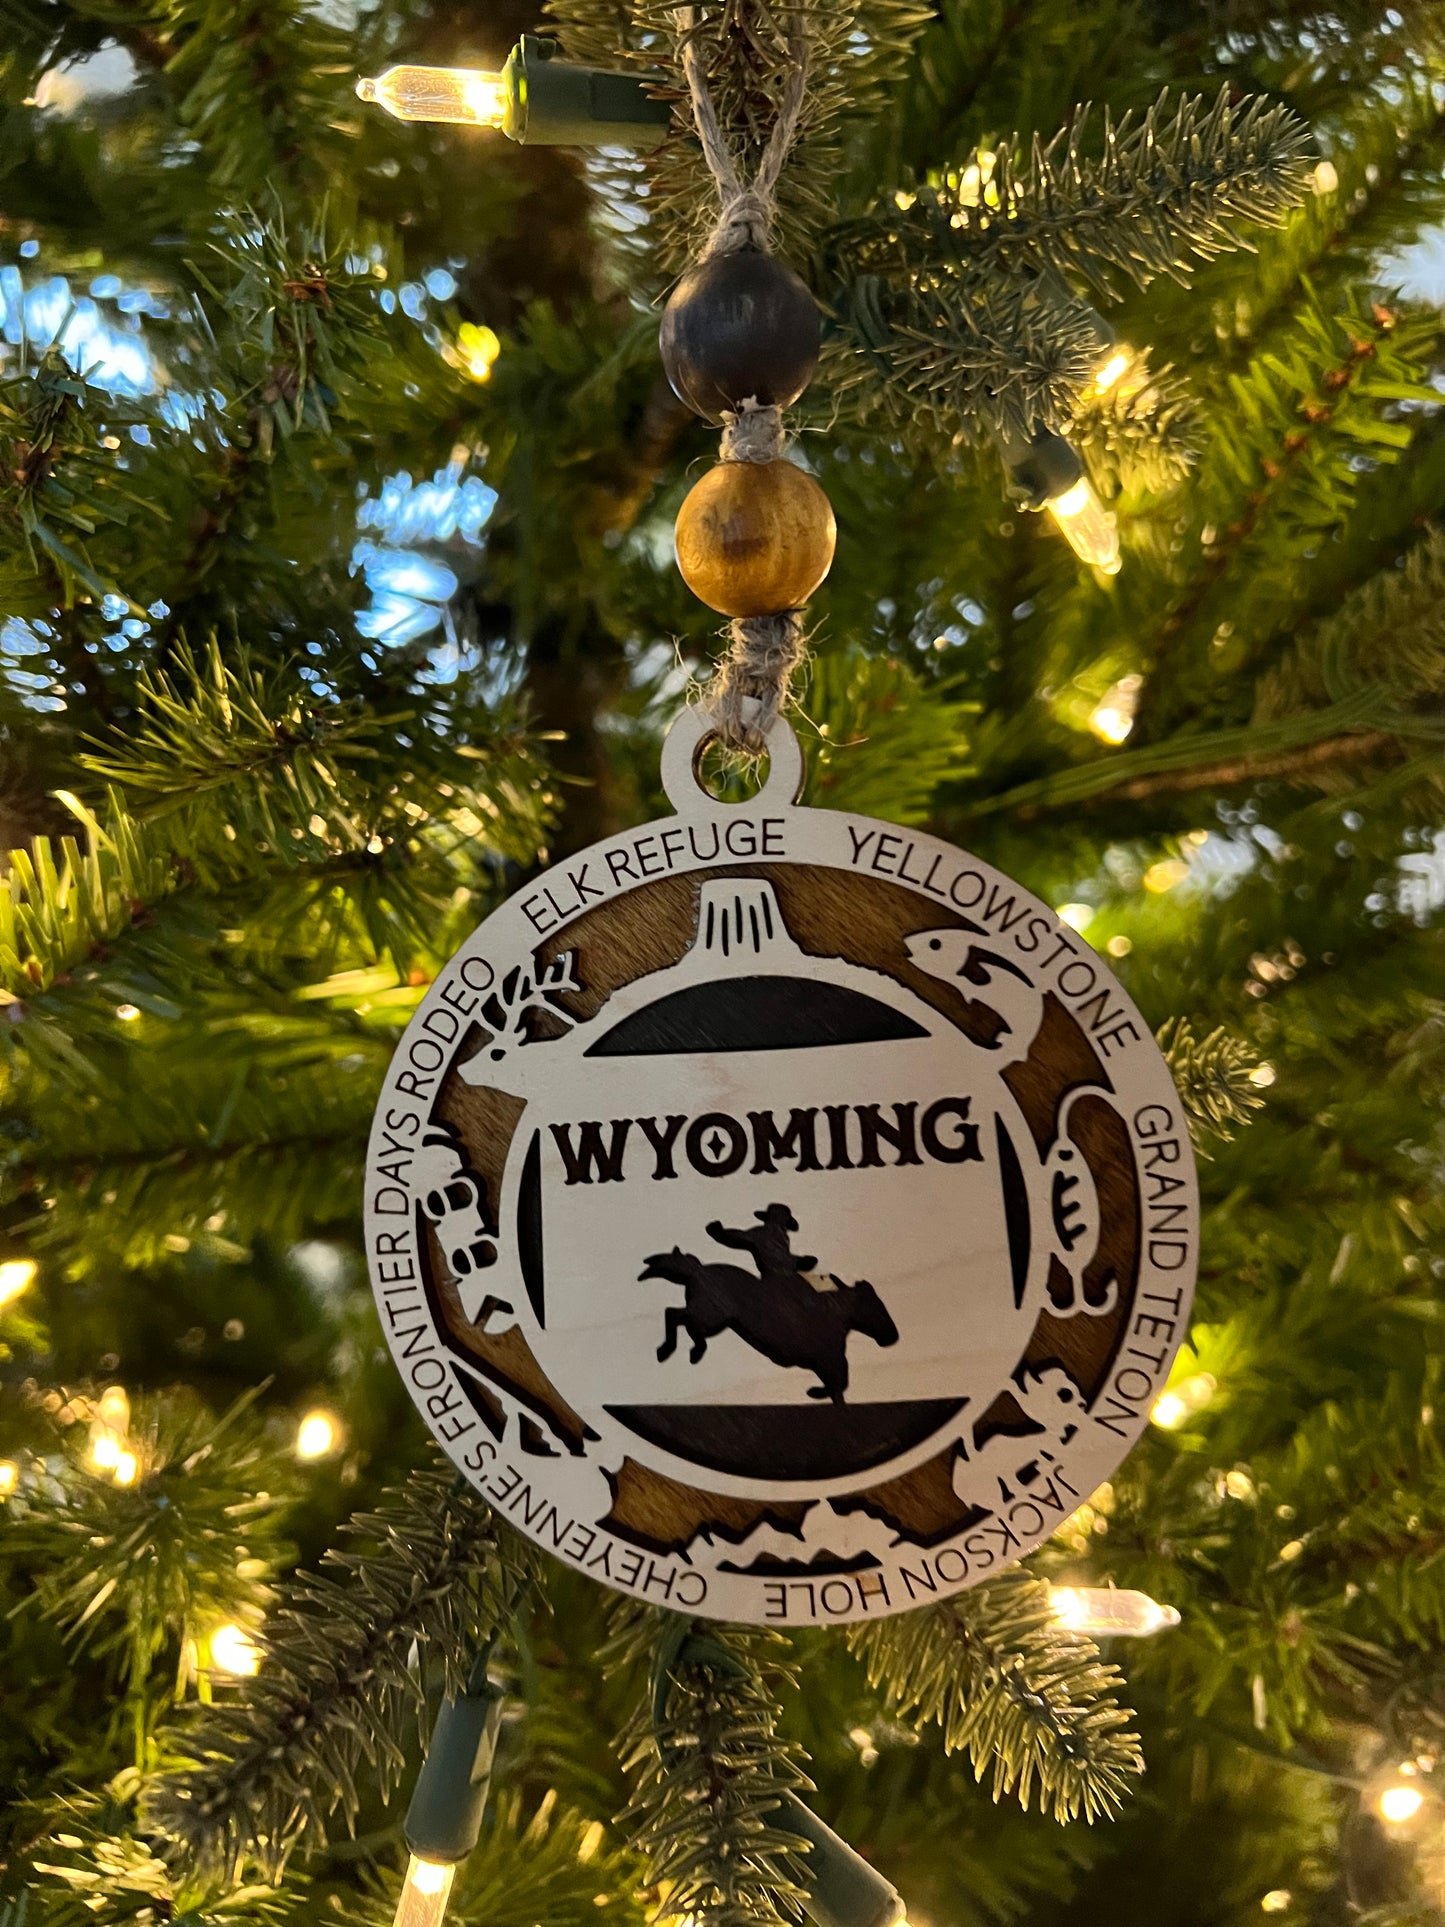 Display State Christmas Ornament - Wyoming